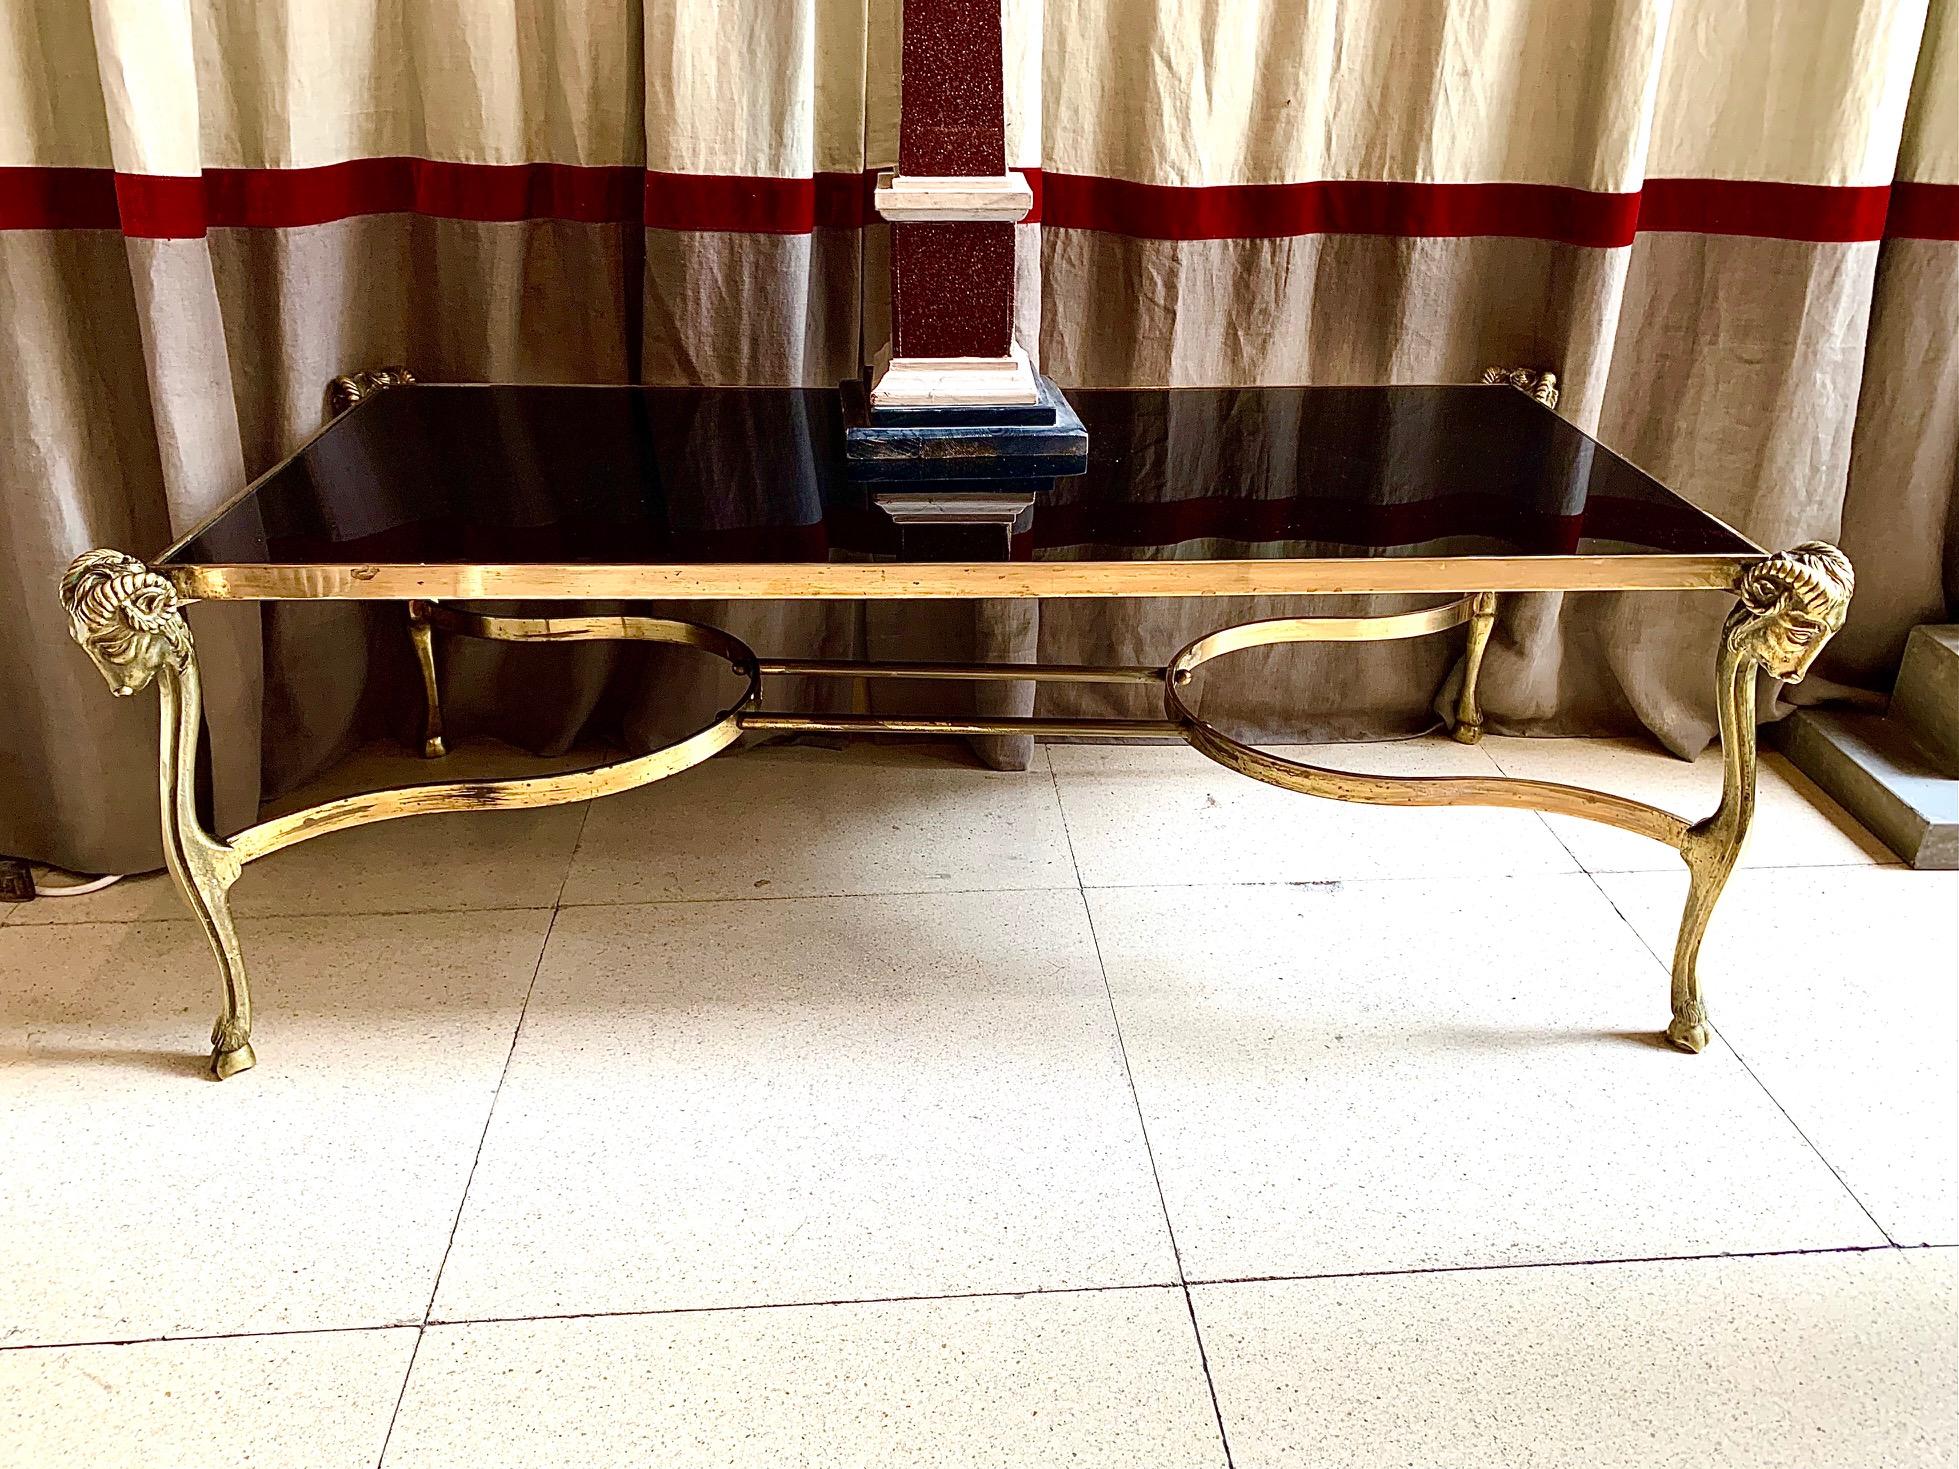 French golden bronze coffee table with balck glass top. The black glass is framed with gilden bronze ribs and is supported by four legs with ram heads, in neoclassical style.